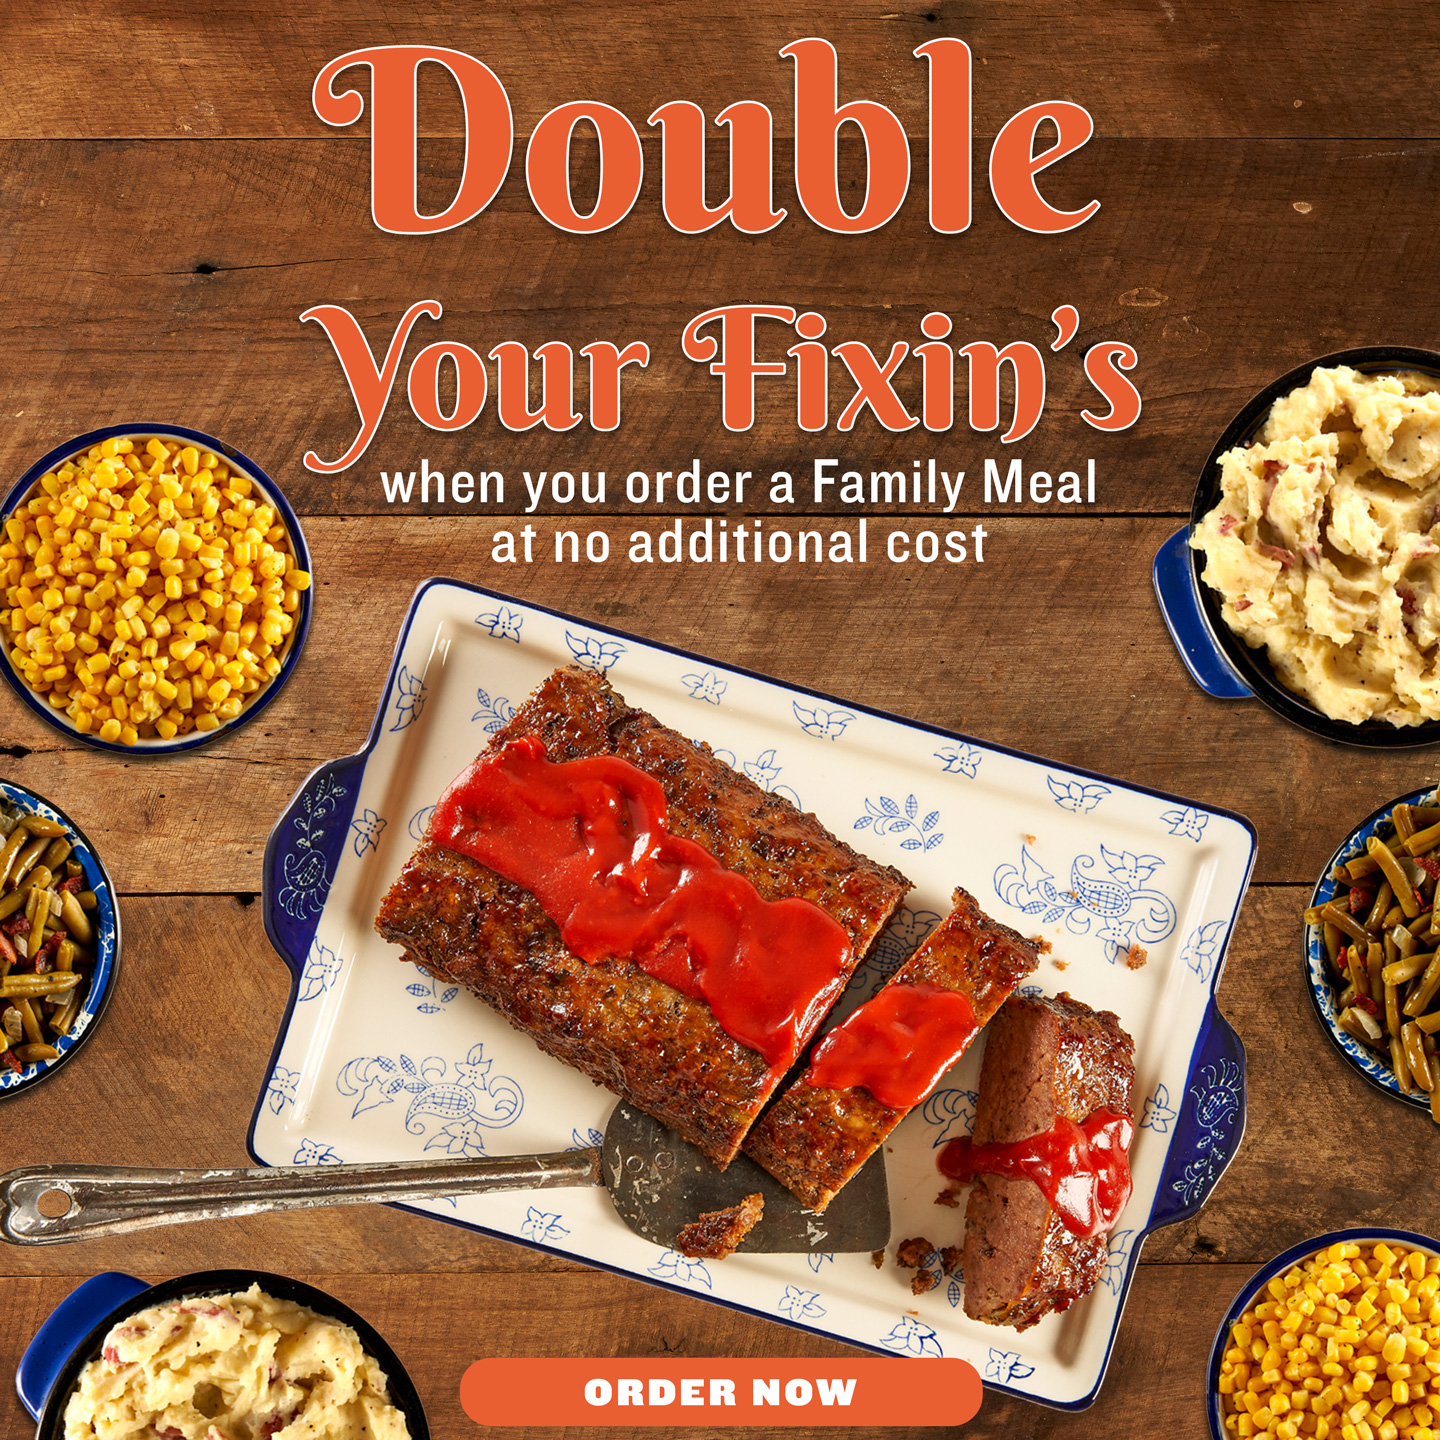 For a limited time, double your Fixin's in a CPC Family Meal for free!